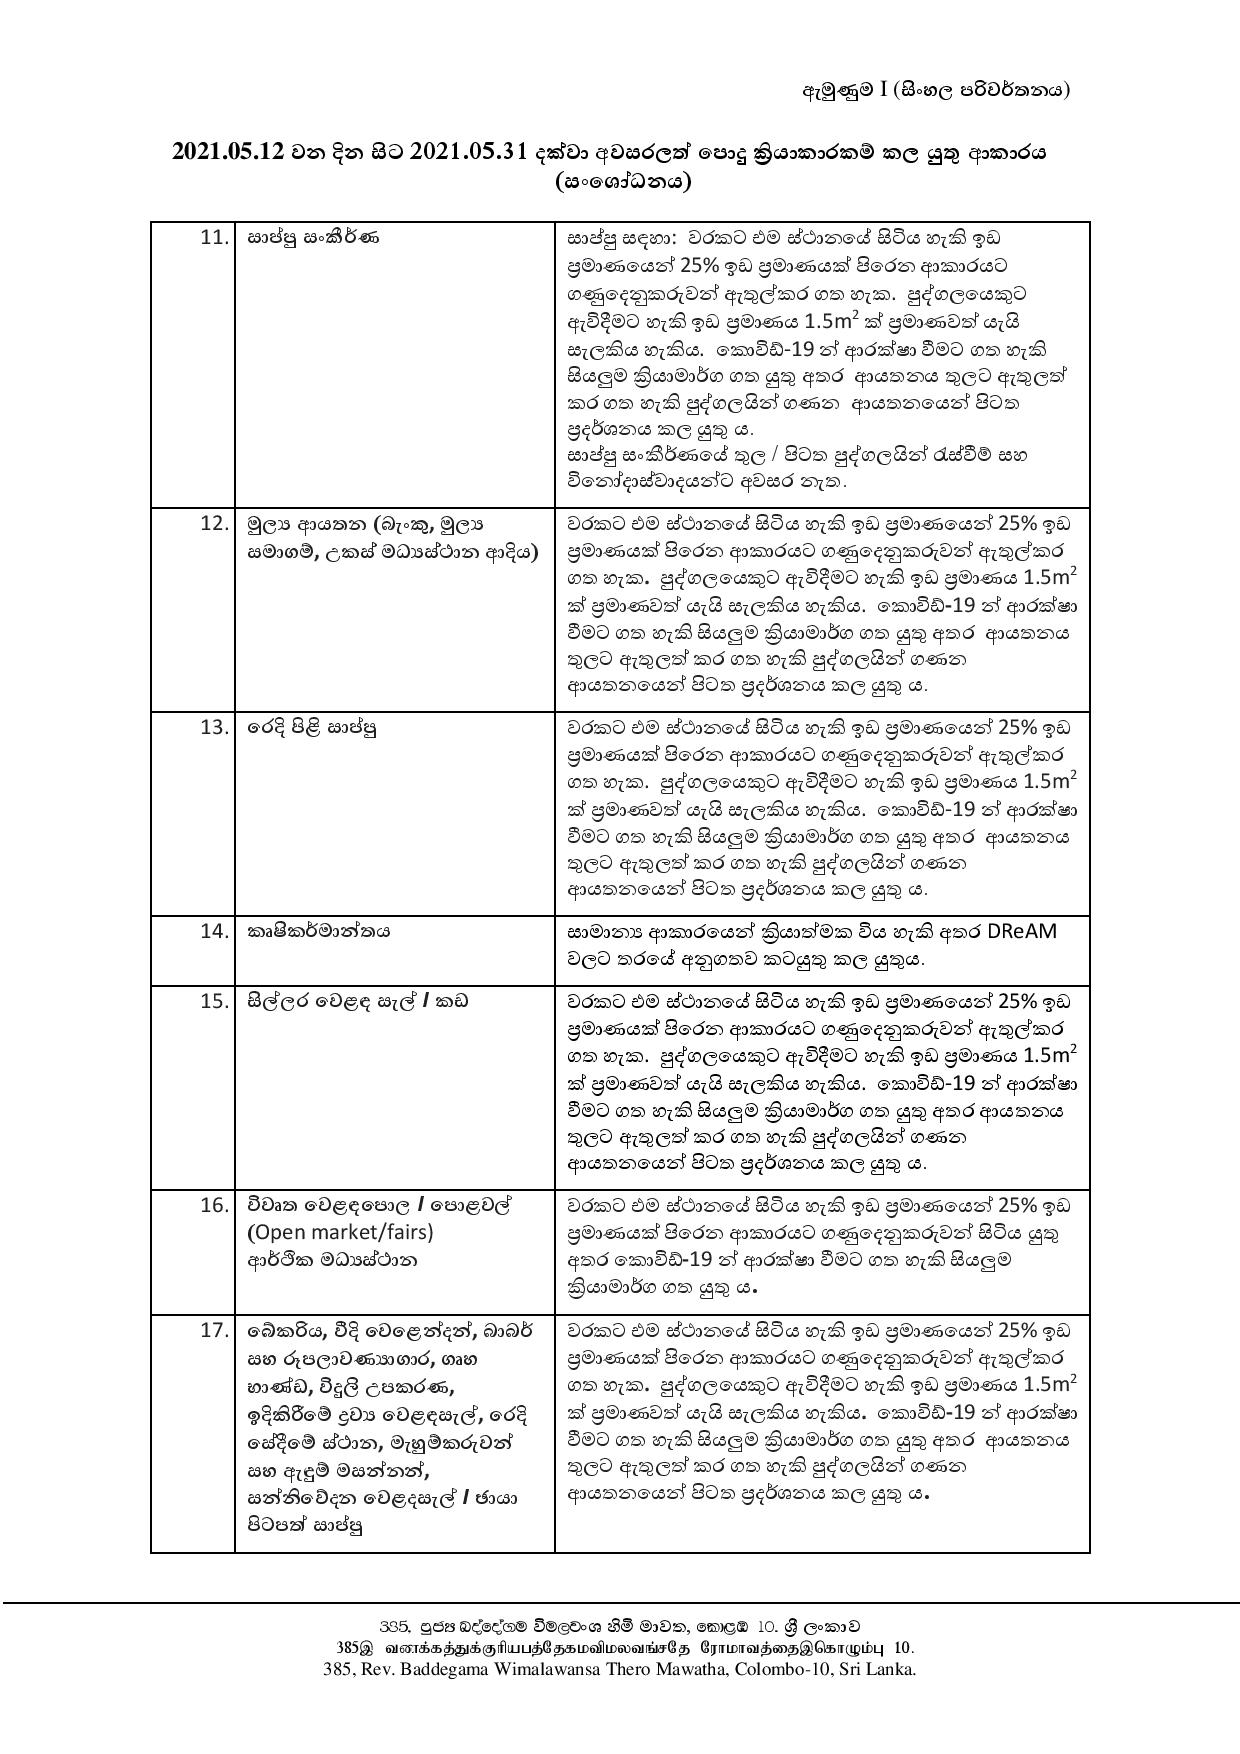 Restriction of inter provincial travel and Revised restrictions on permitted functions with effect from 12.05.2021 until 31.05.2021 EnglishSinhala 1 page 007